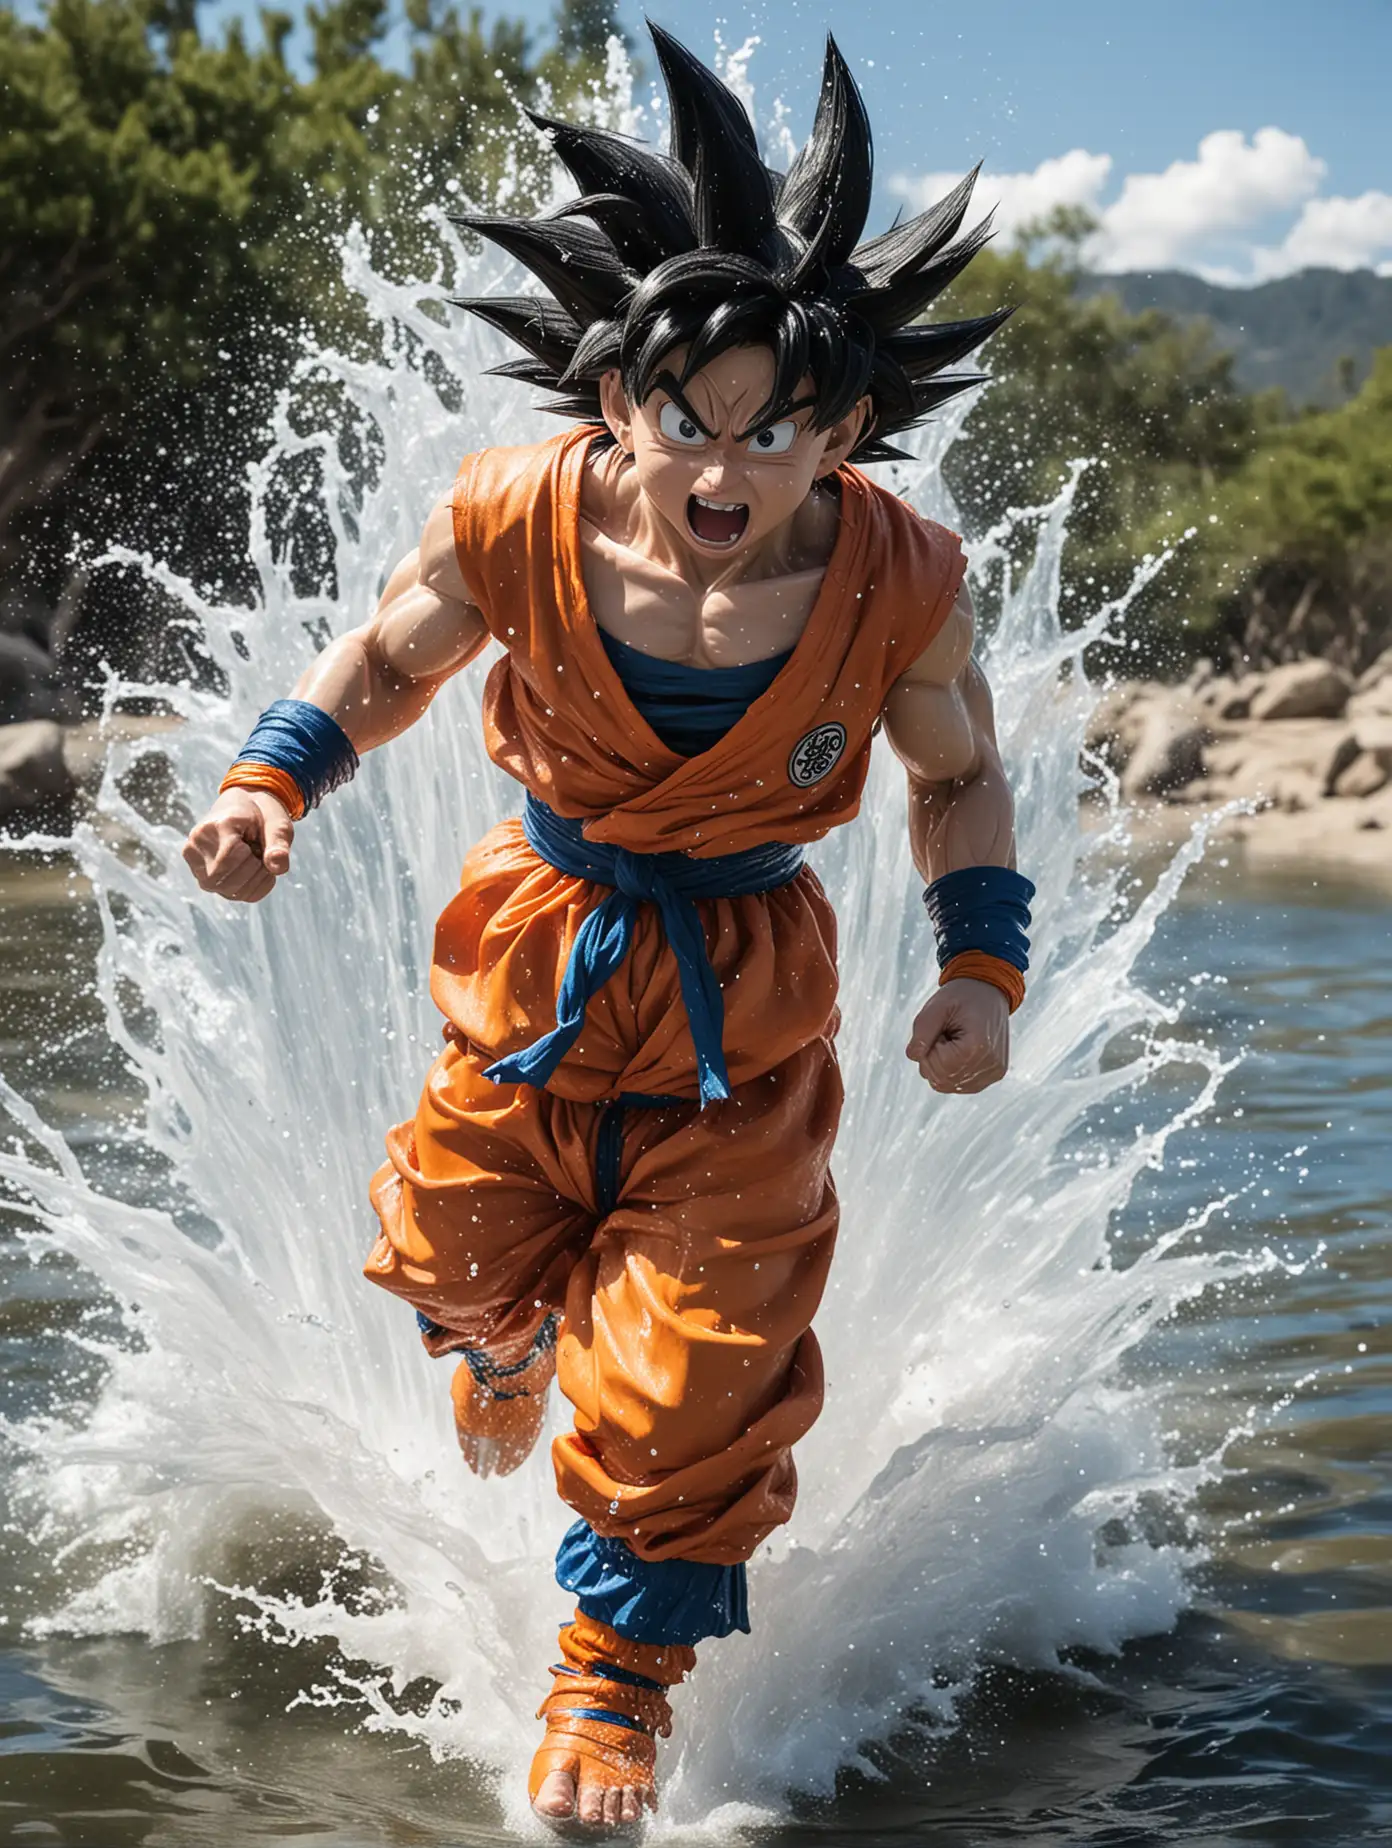 Goku Running on Water with Intense Speed and Power